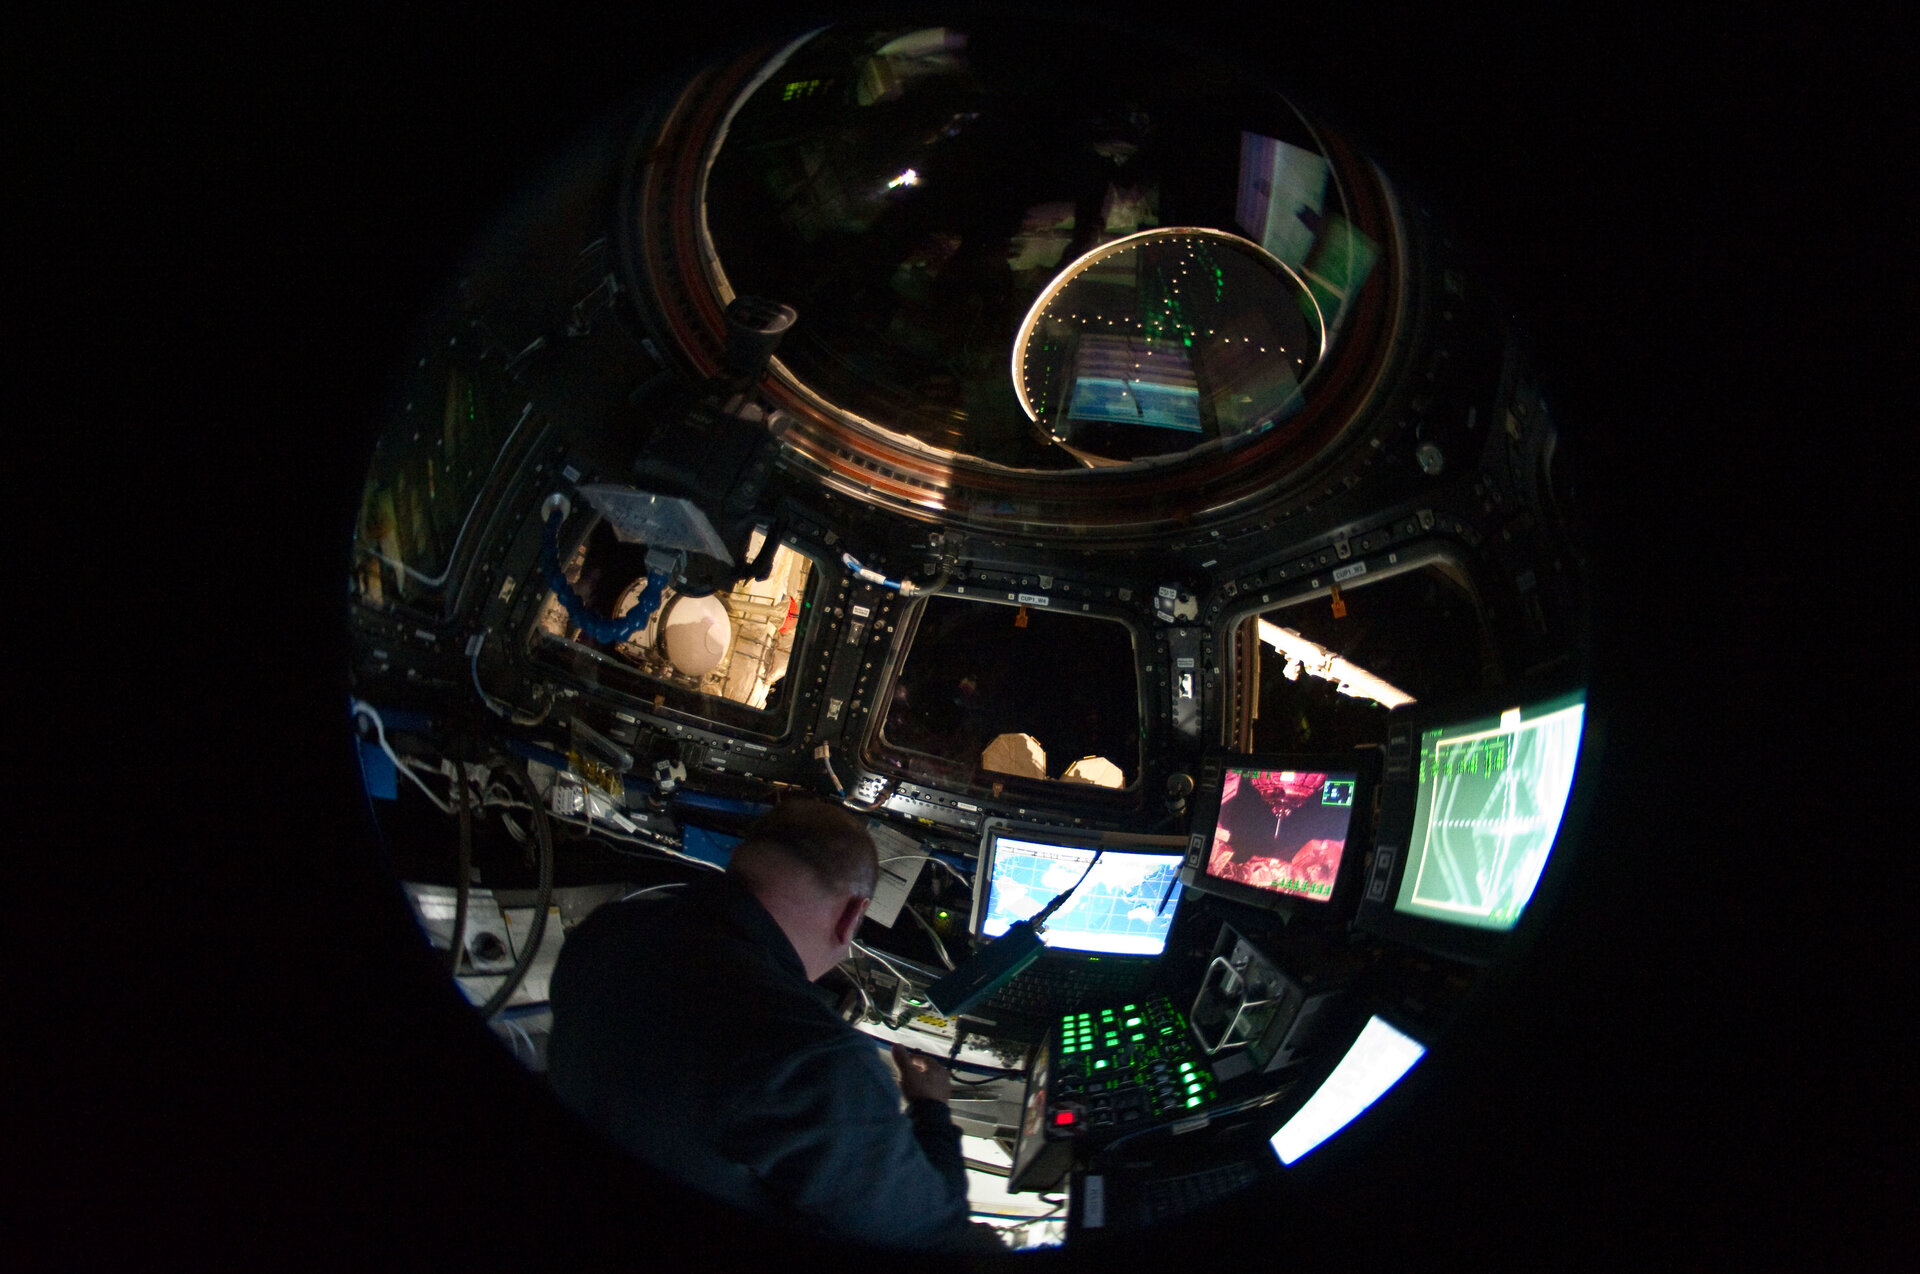 Windows and computers in the Cupola